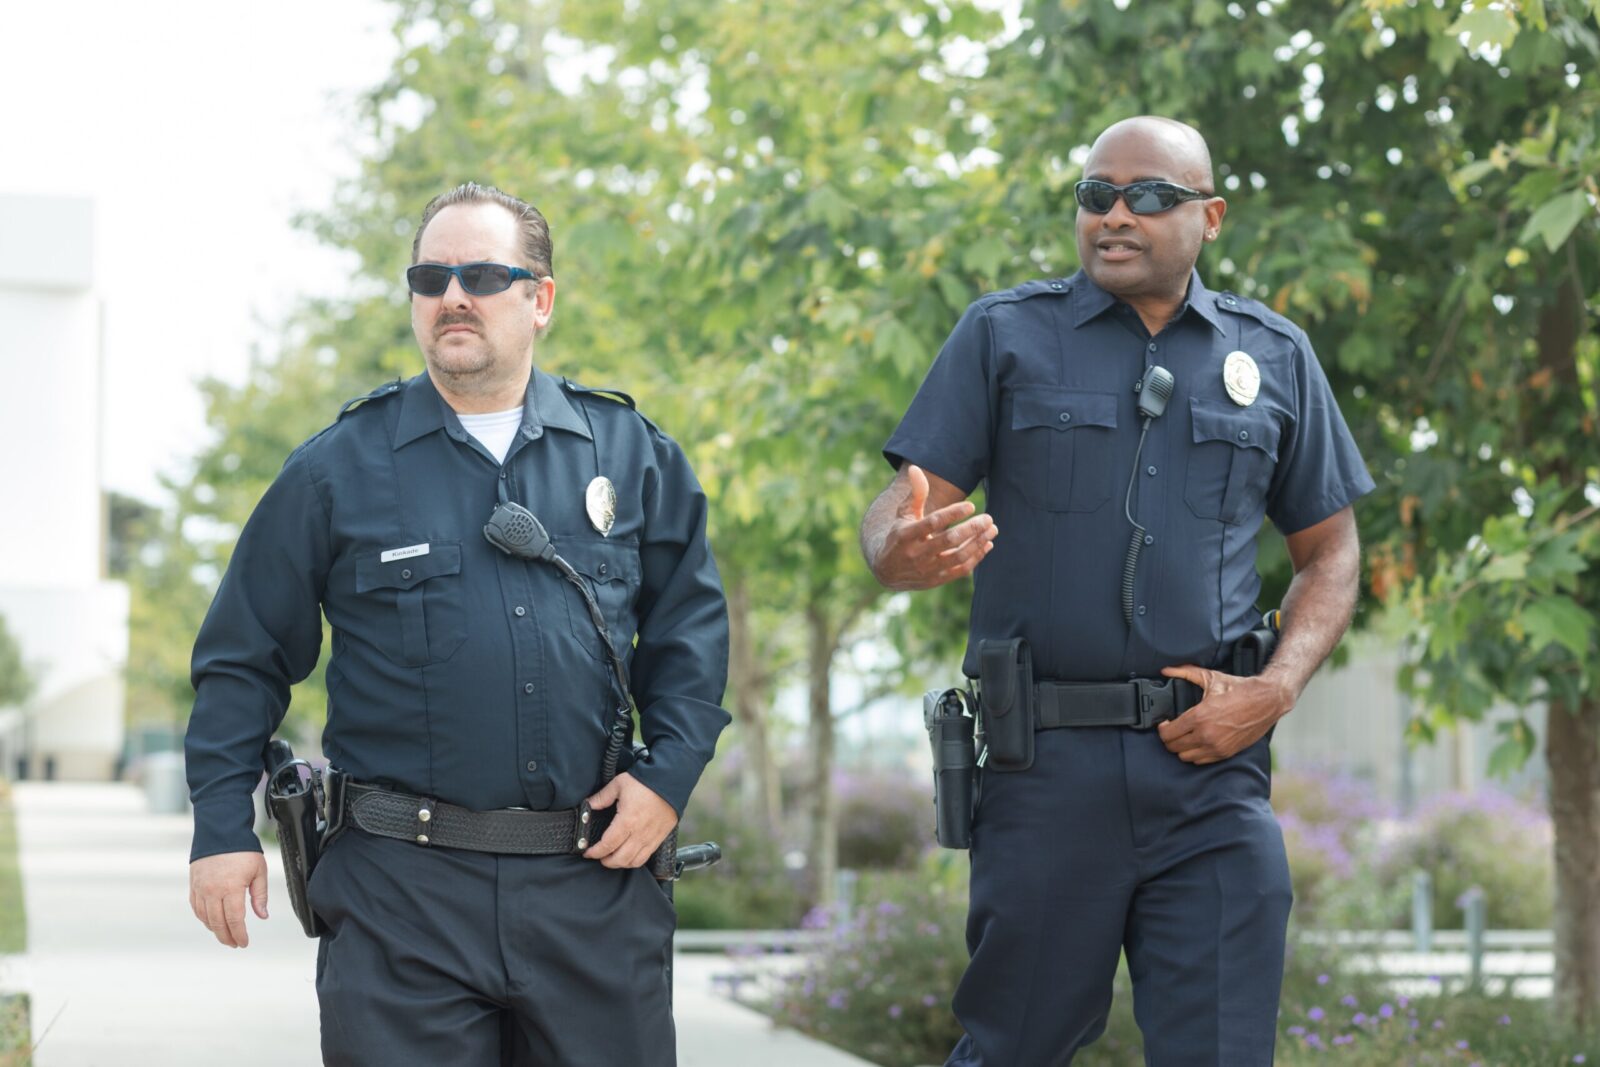 Police Survey Questions two police officers walking